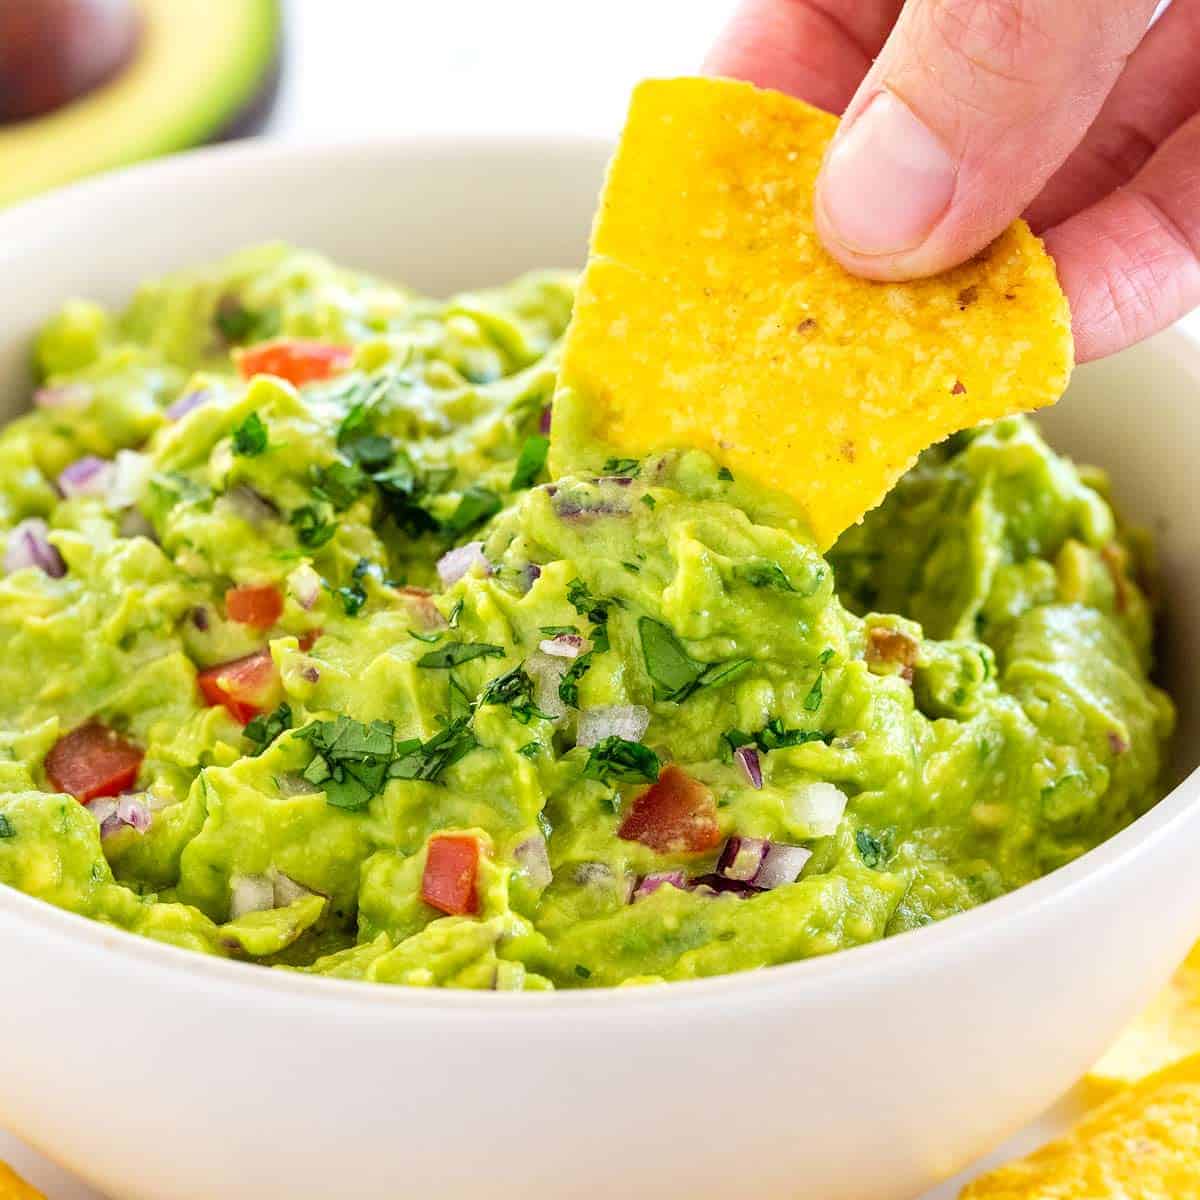 How To Store Guacamole Dip